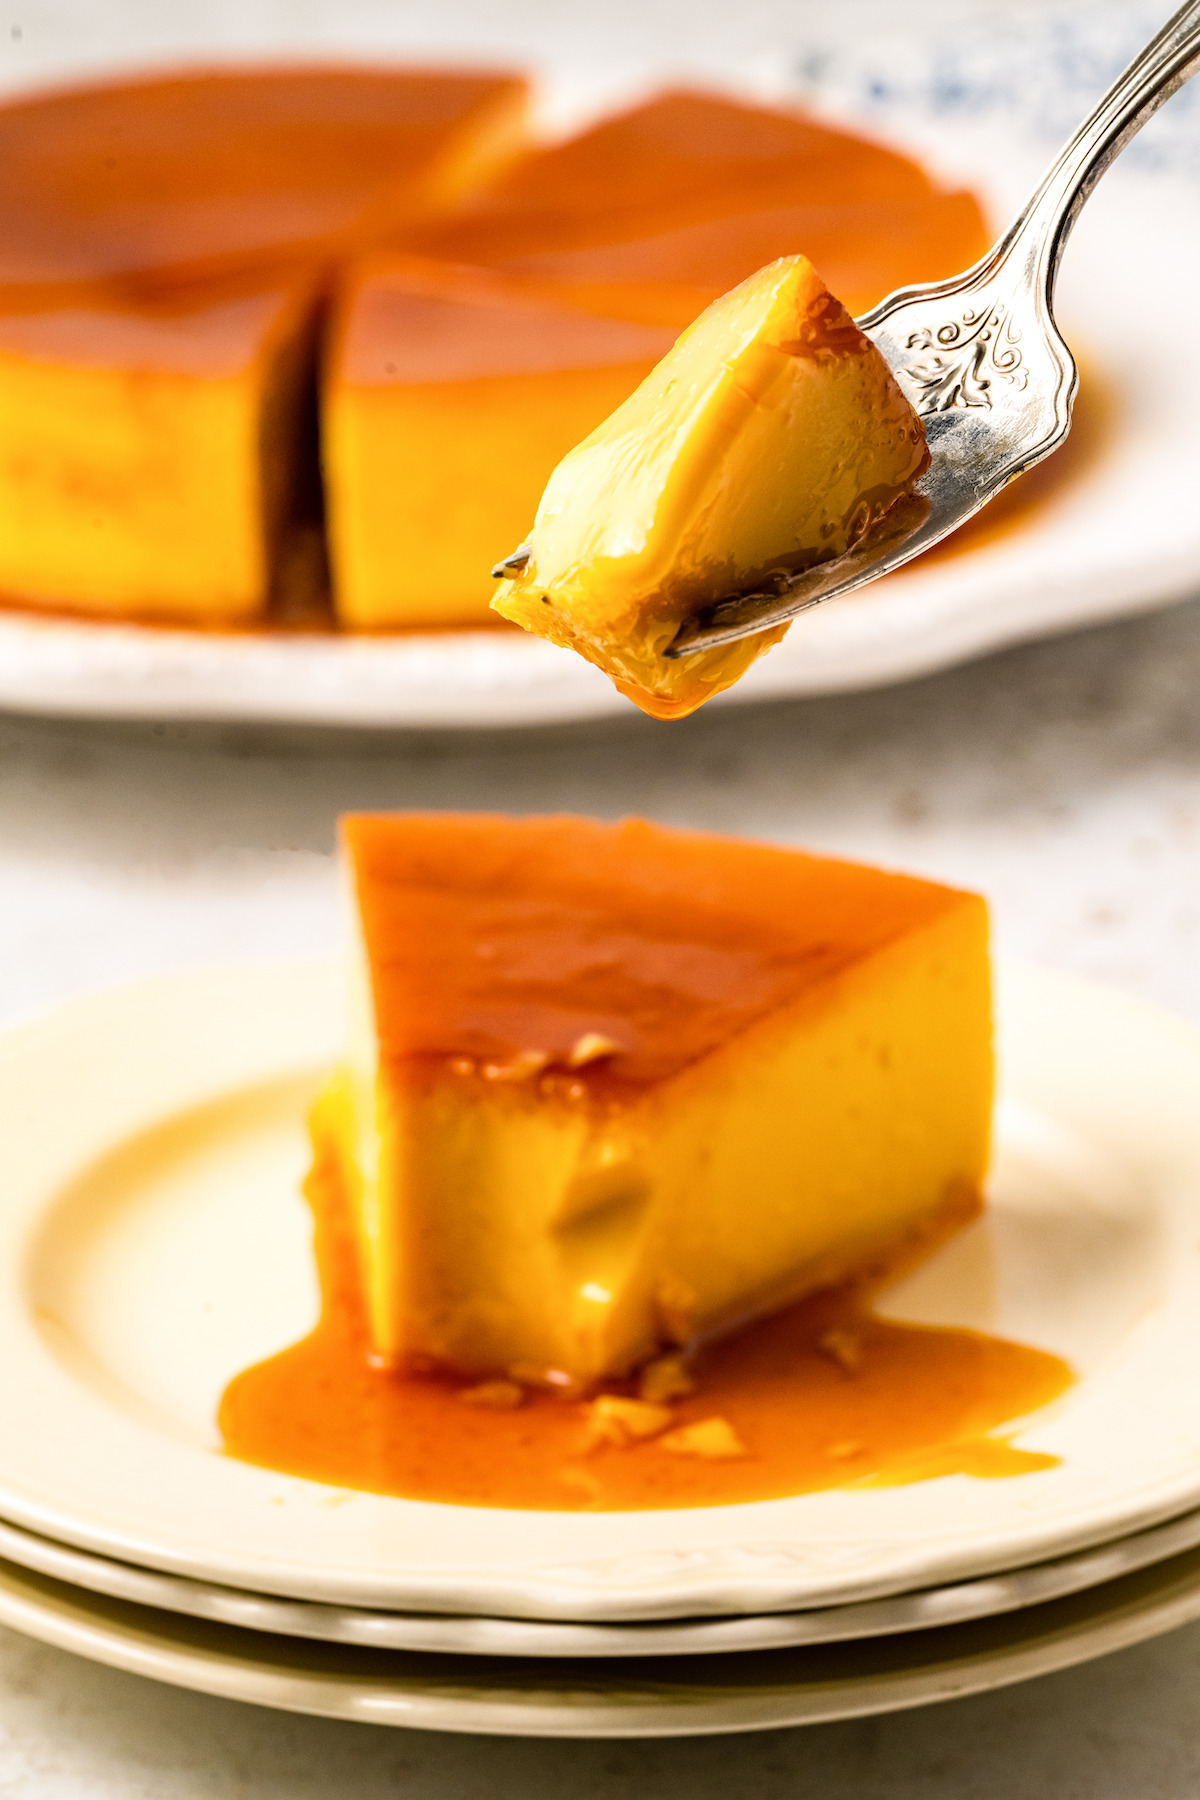 Spoonful of flan with caramel.